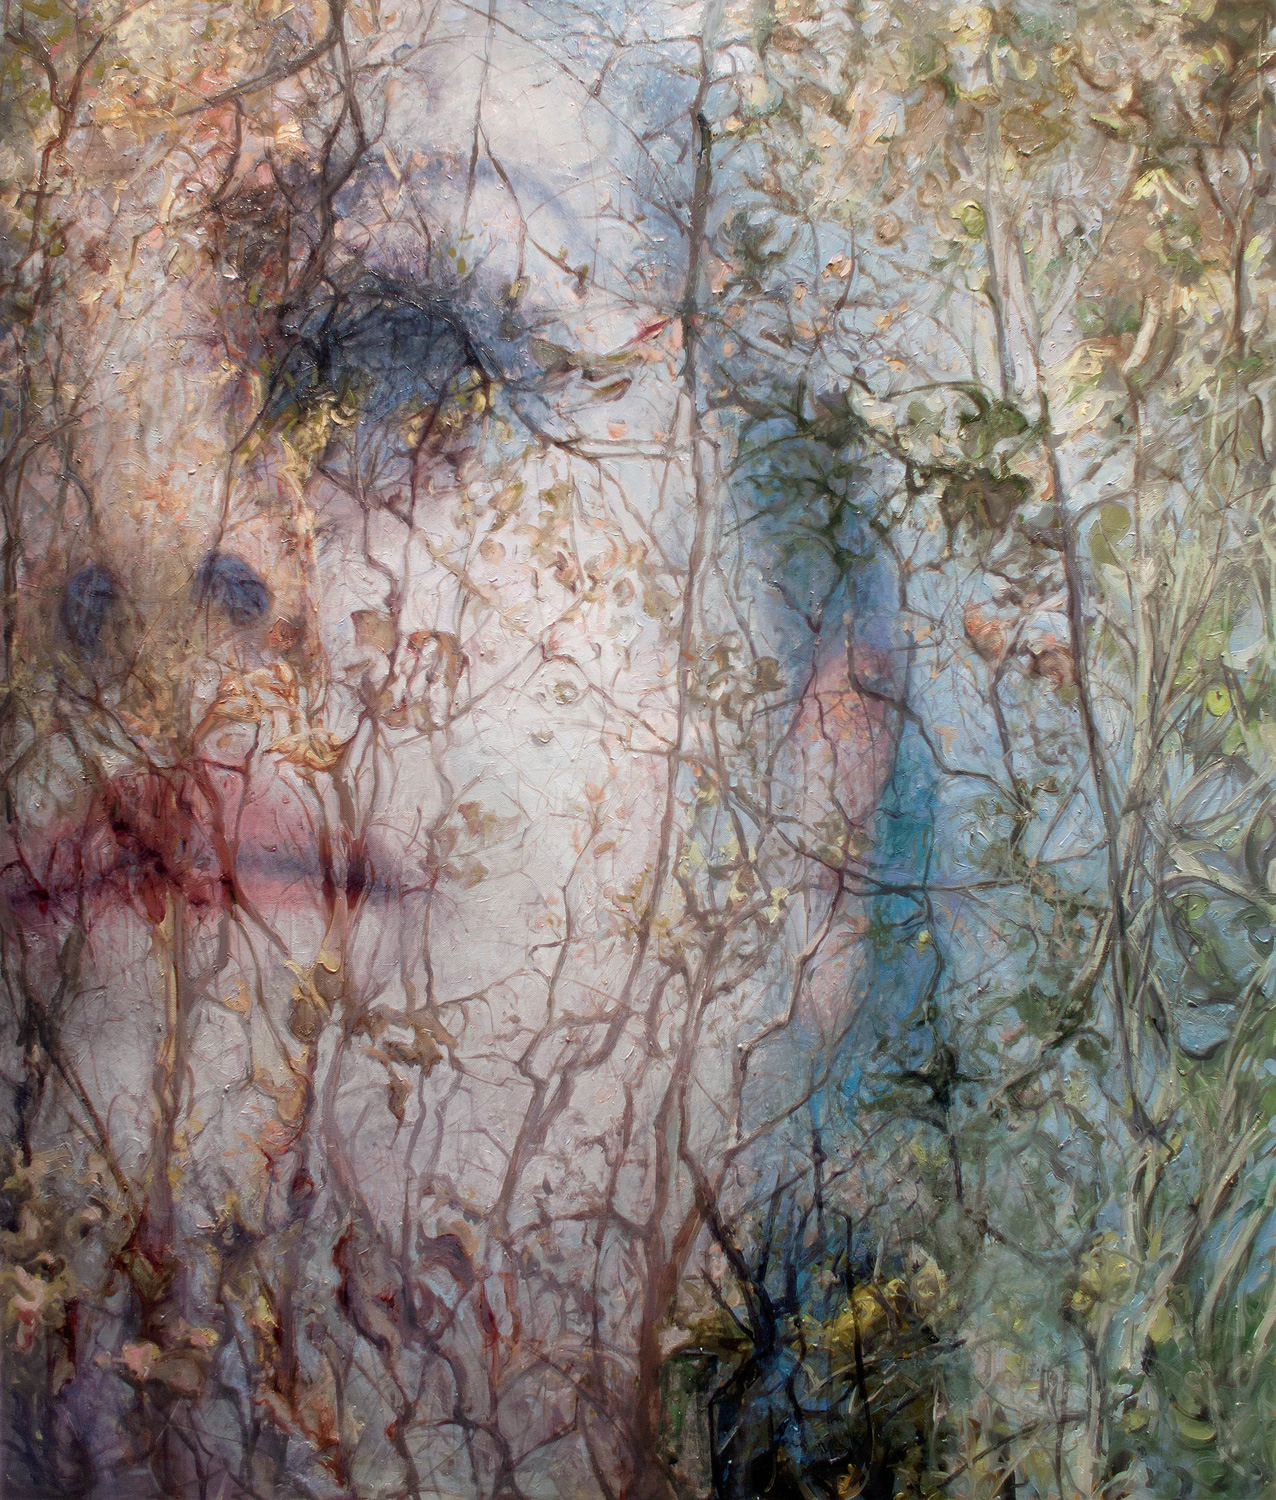 alyssa monks painting deference